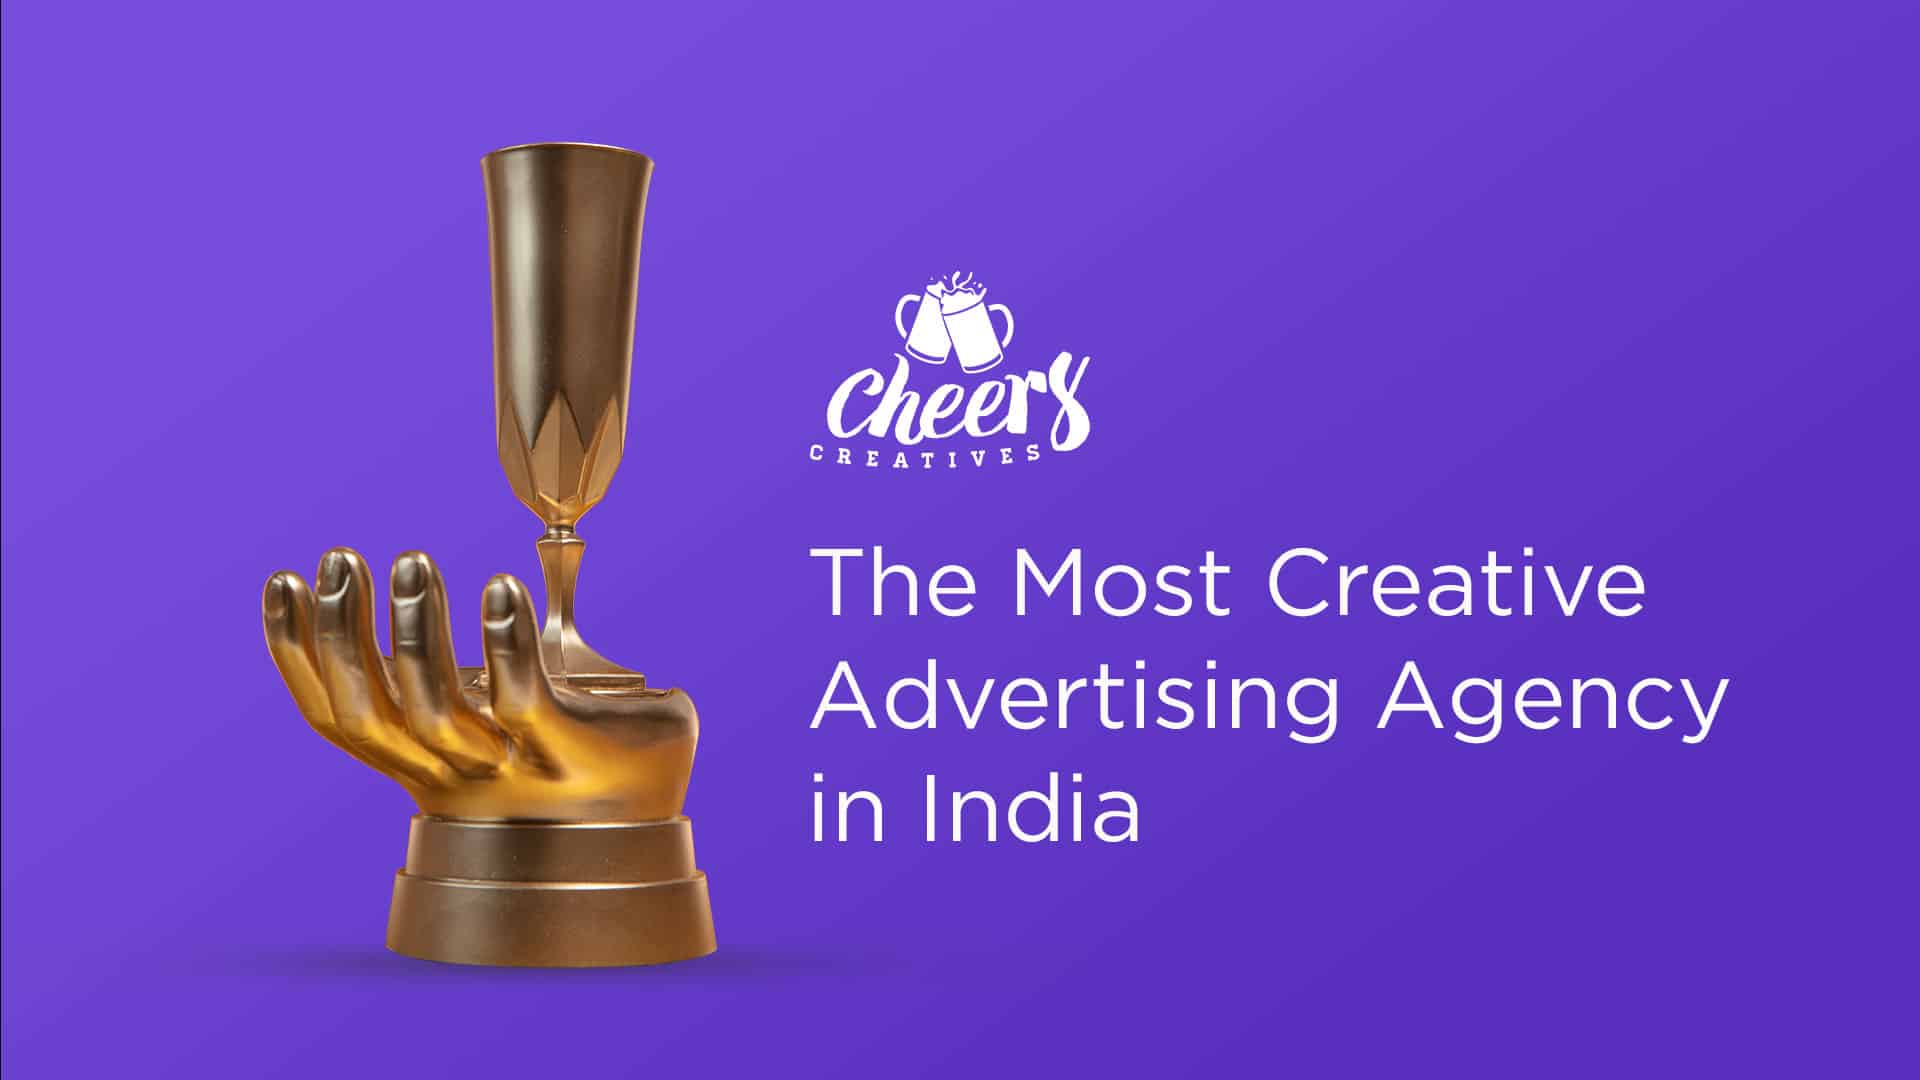 Cheers Creative Agency LLP The Most Creative Advertising Agency in India